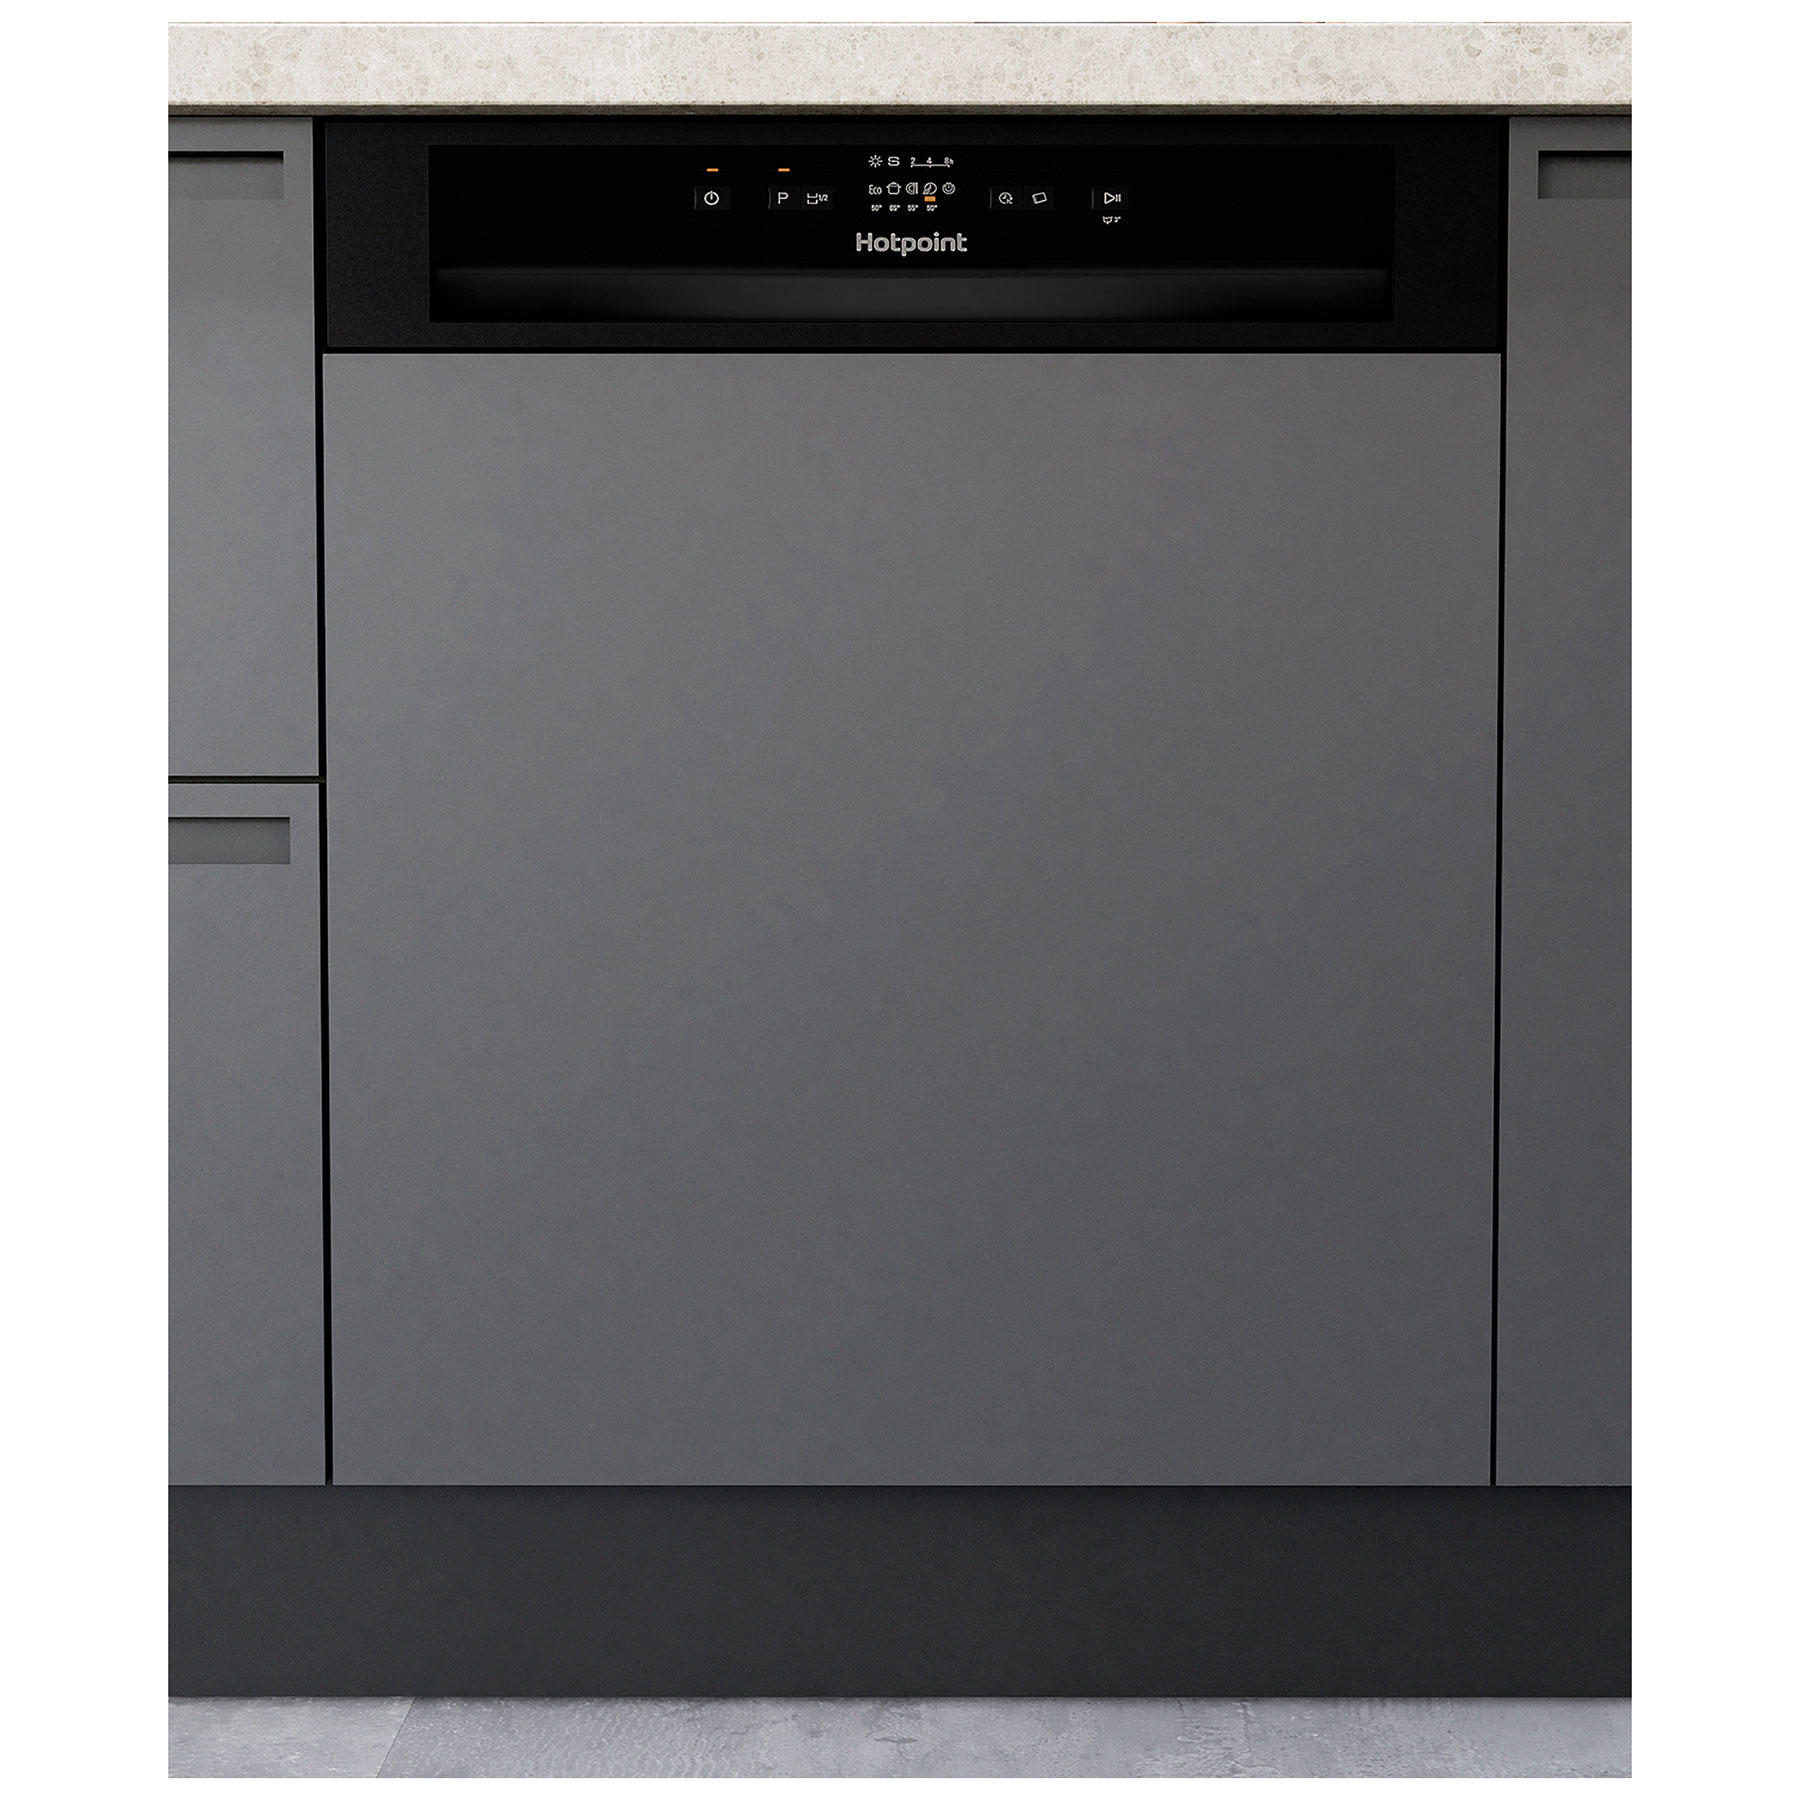 Image of Hotpoint H3BL626BUK 60cm Semi Integrated Dishwasher 14 Place E Rated